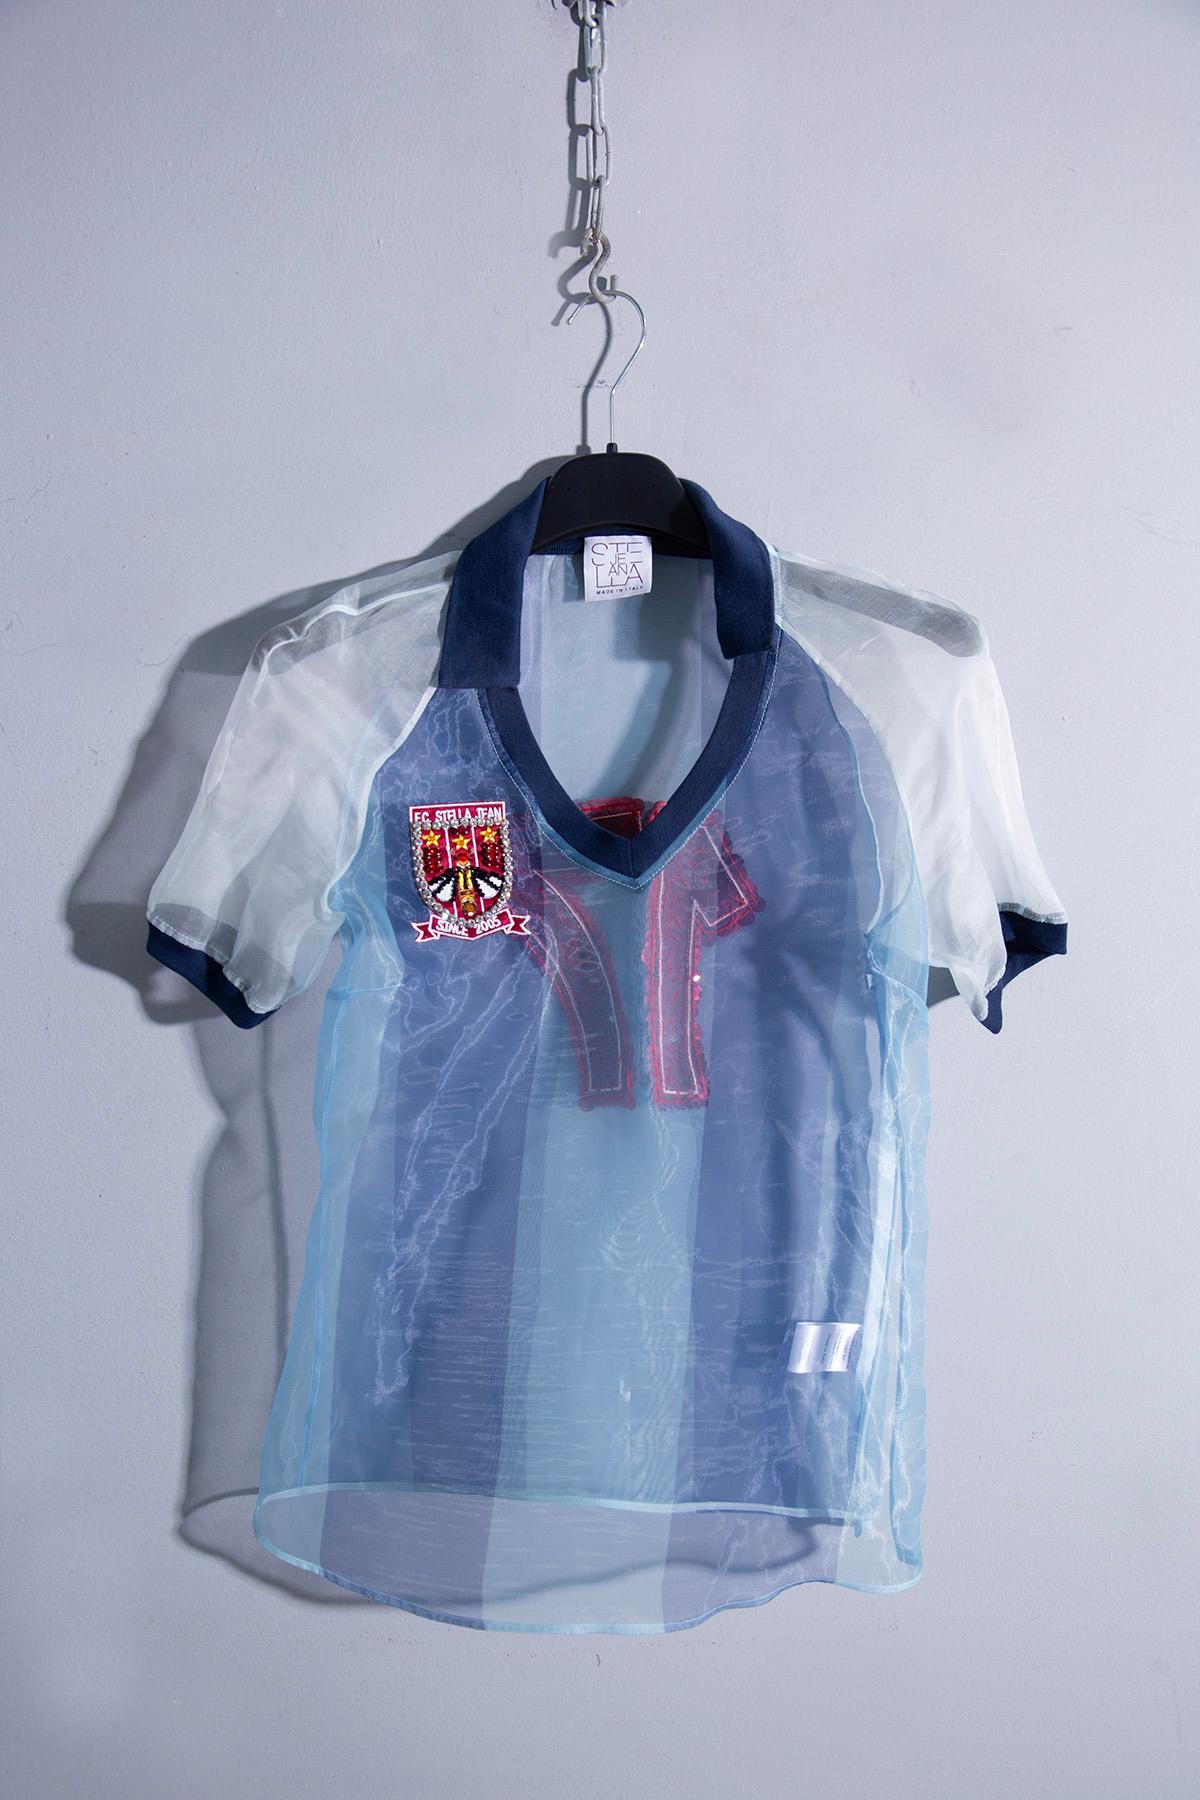 Stella Jean t-shirt for the Spanish team, 2005 In Good Condition For Sale In Milano, IT